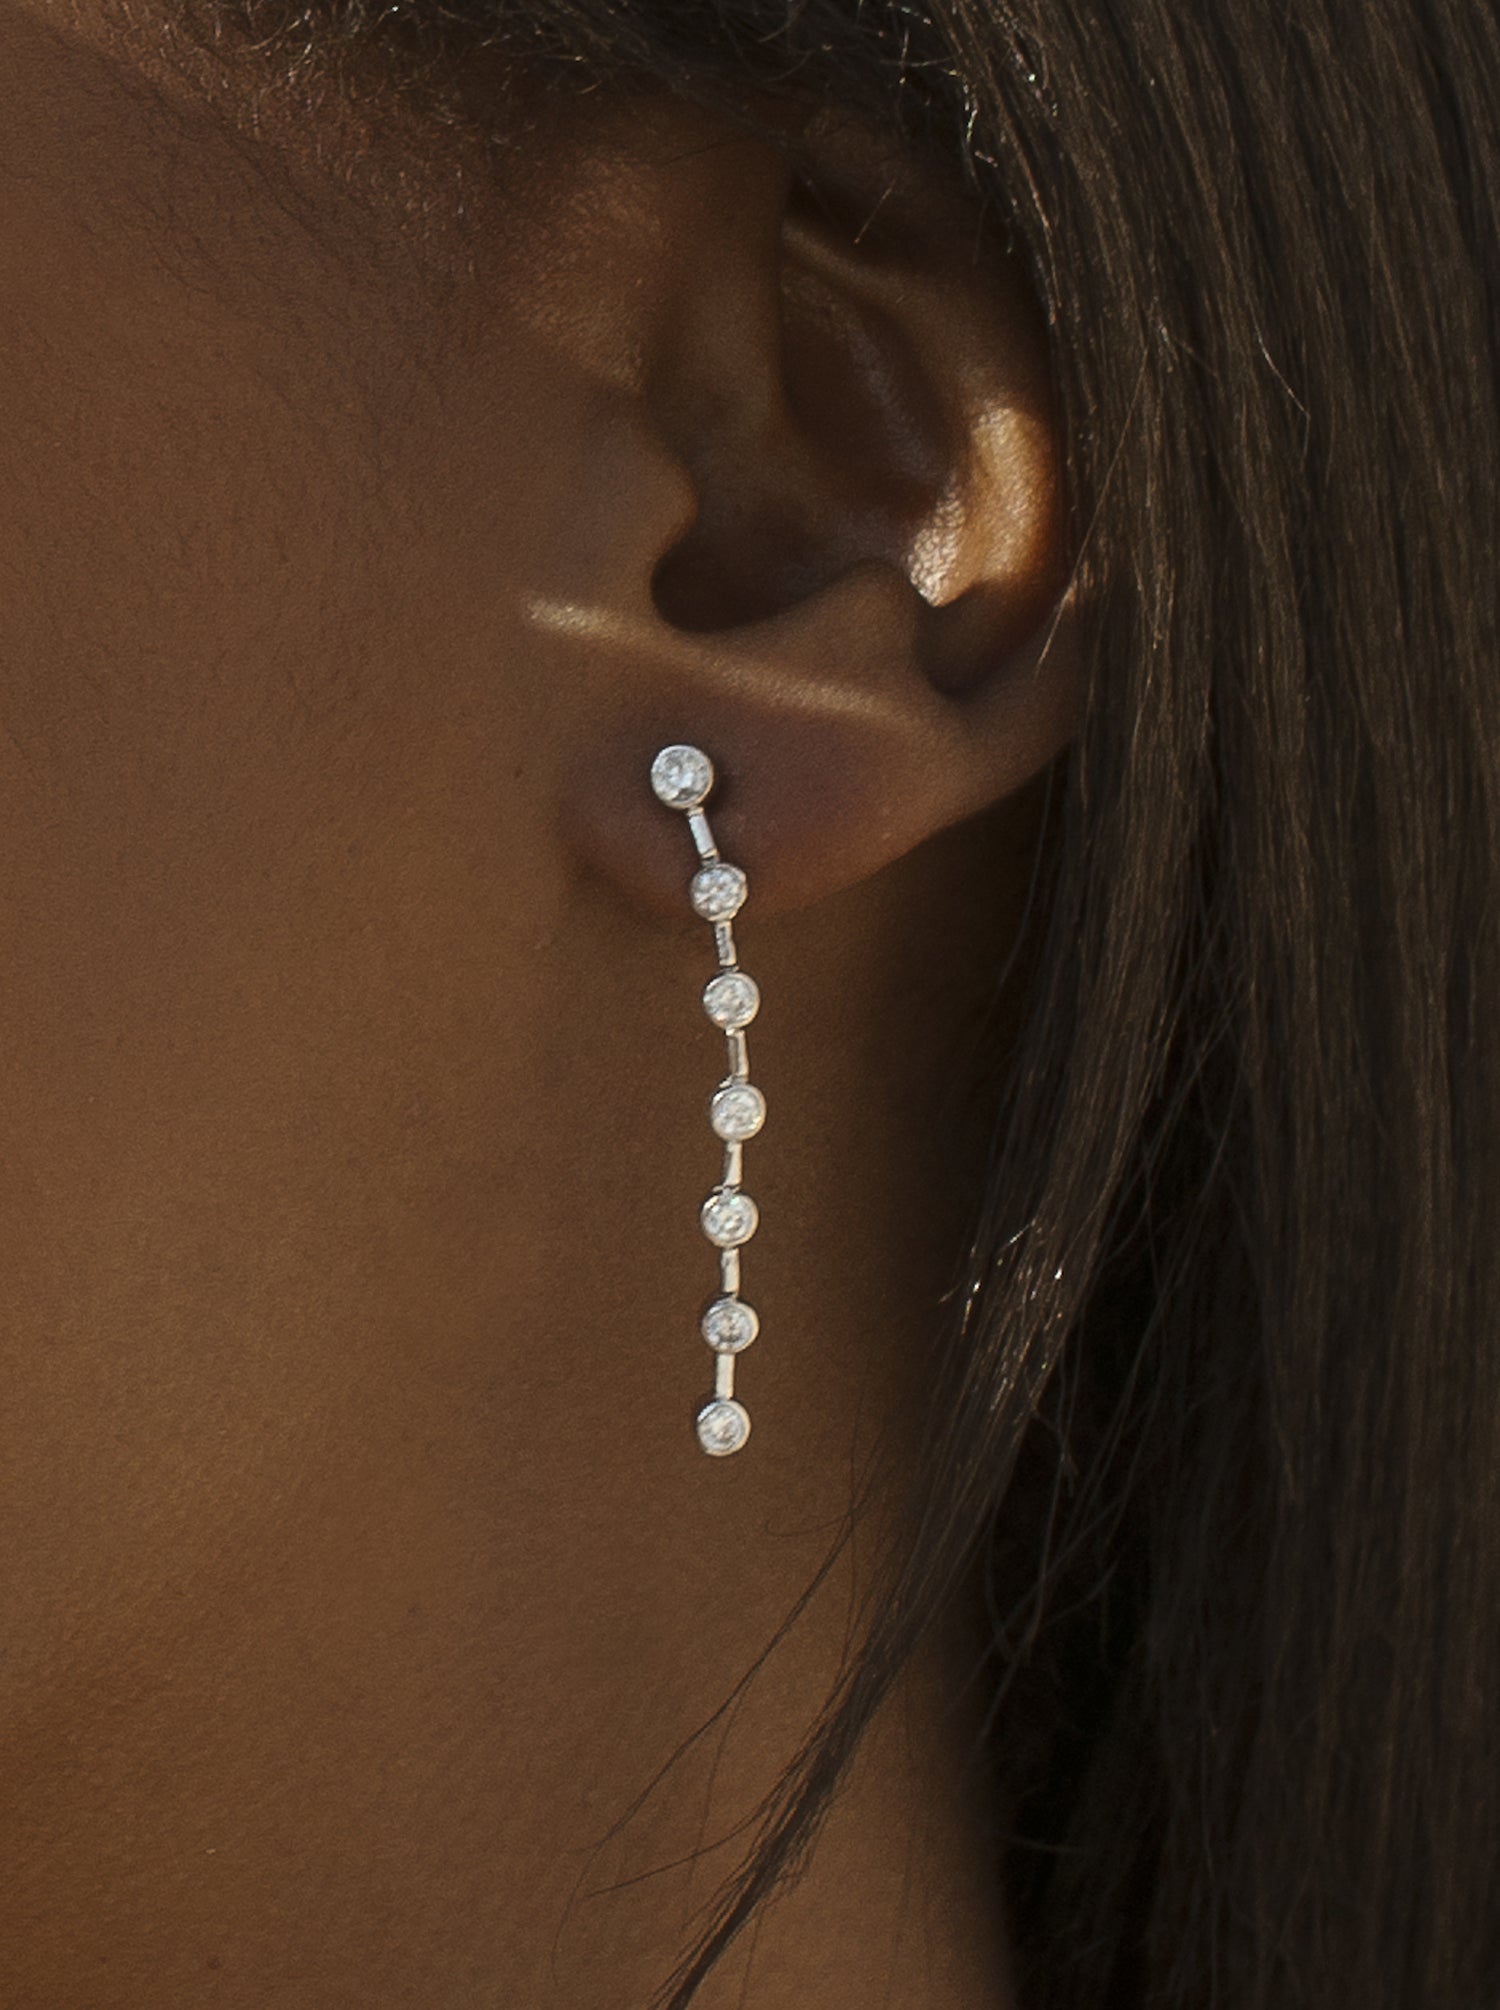 Long thin earrings linear design with zirconias